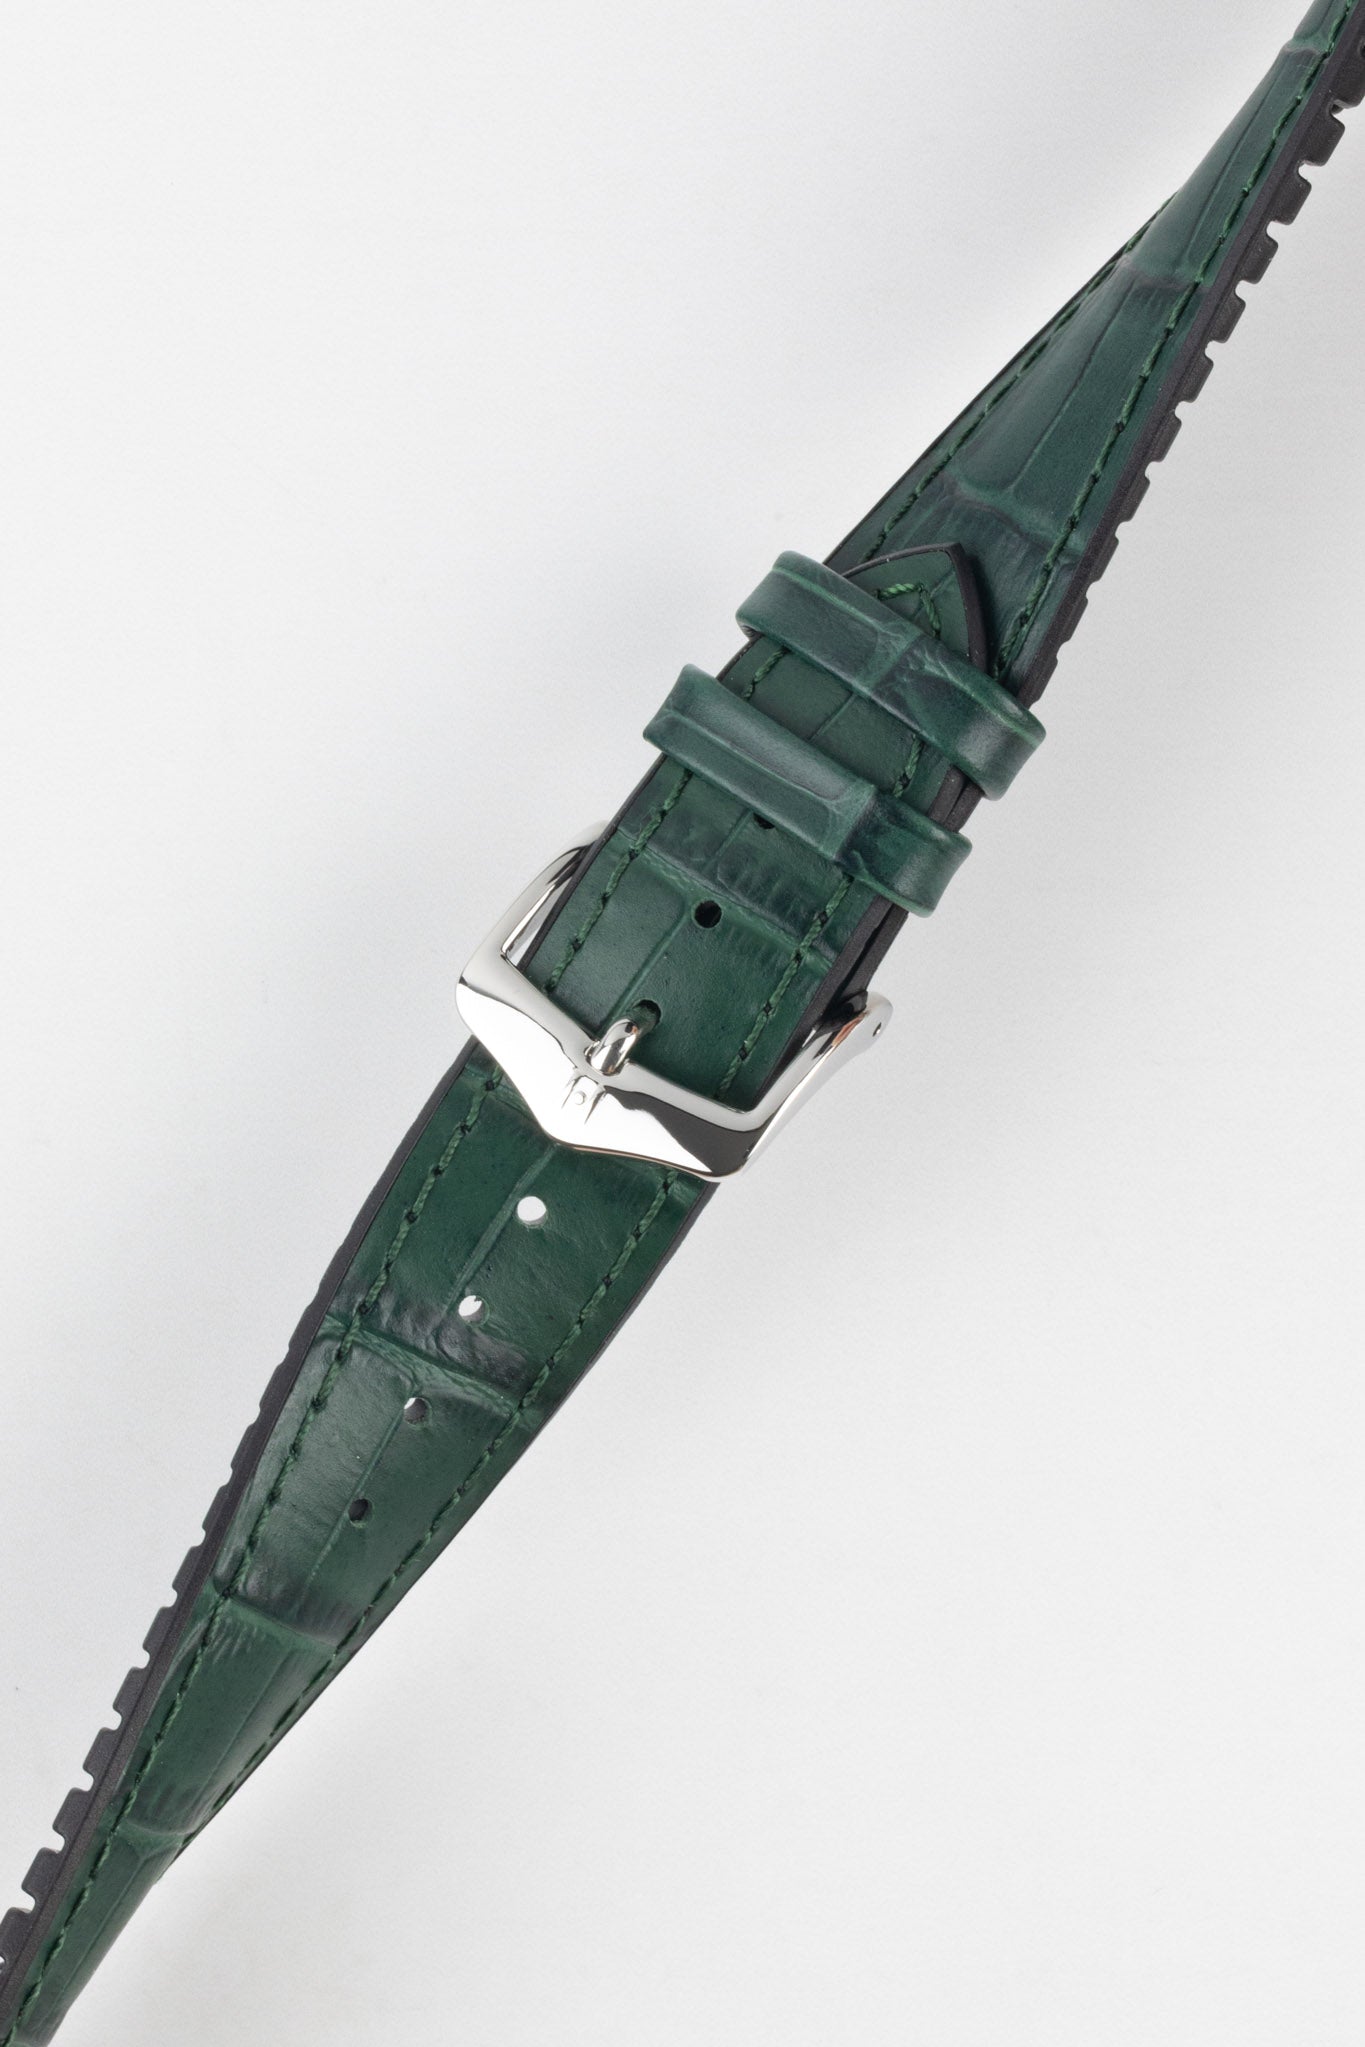 Hirsch Paul in Green buckled and twisted to show flexibility and durability